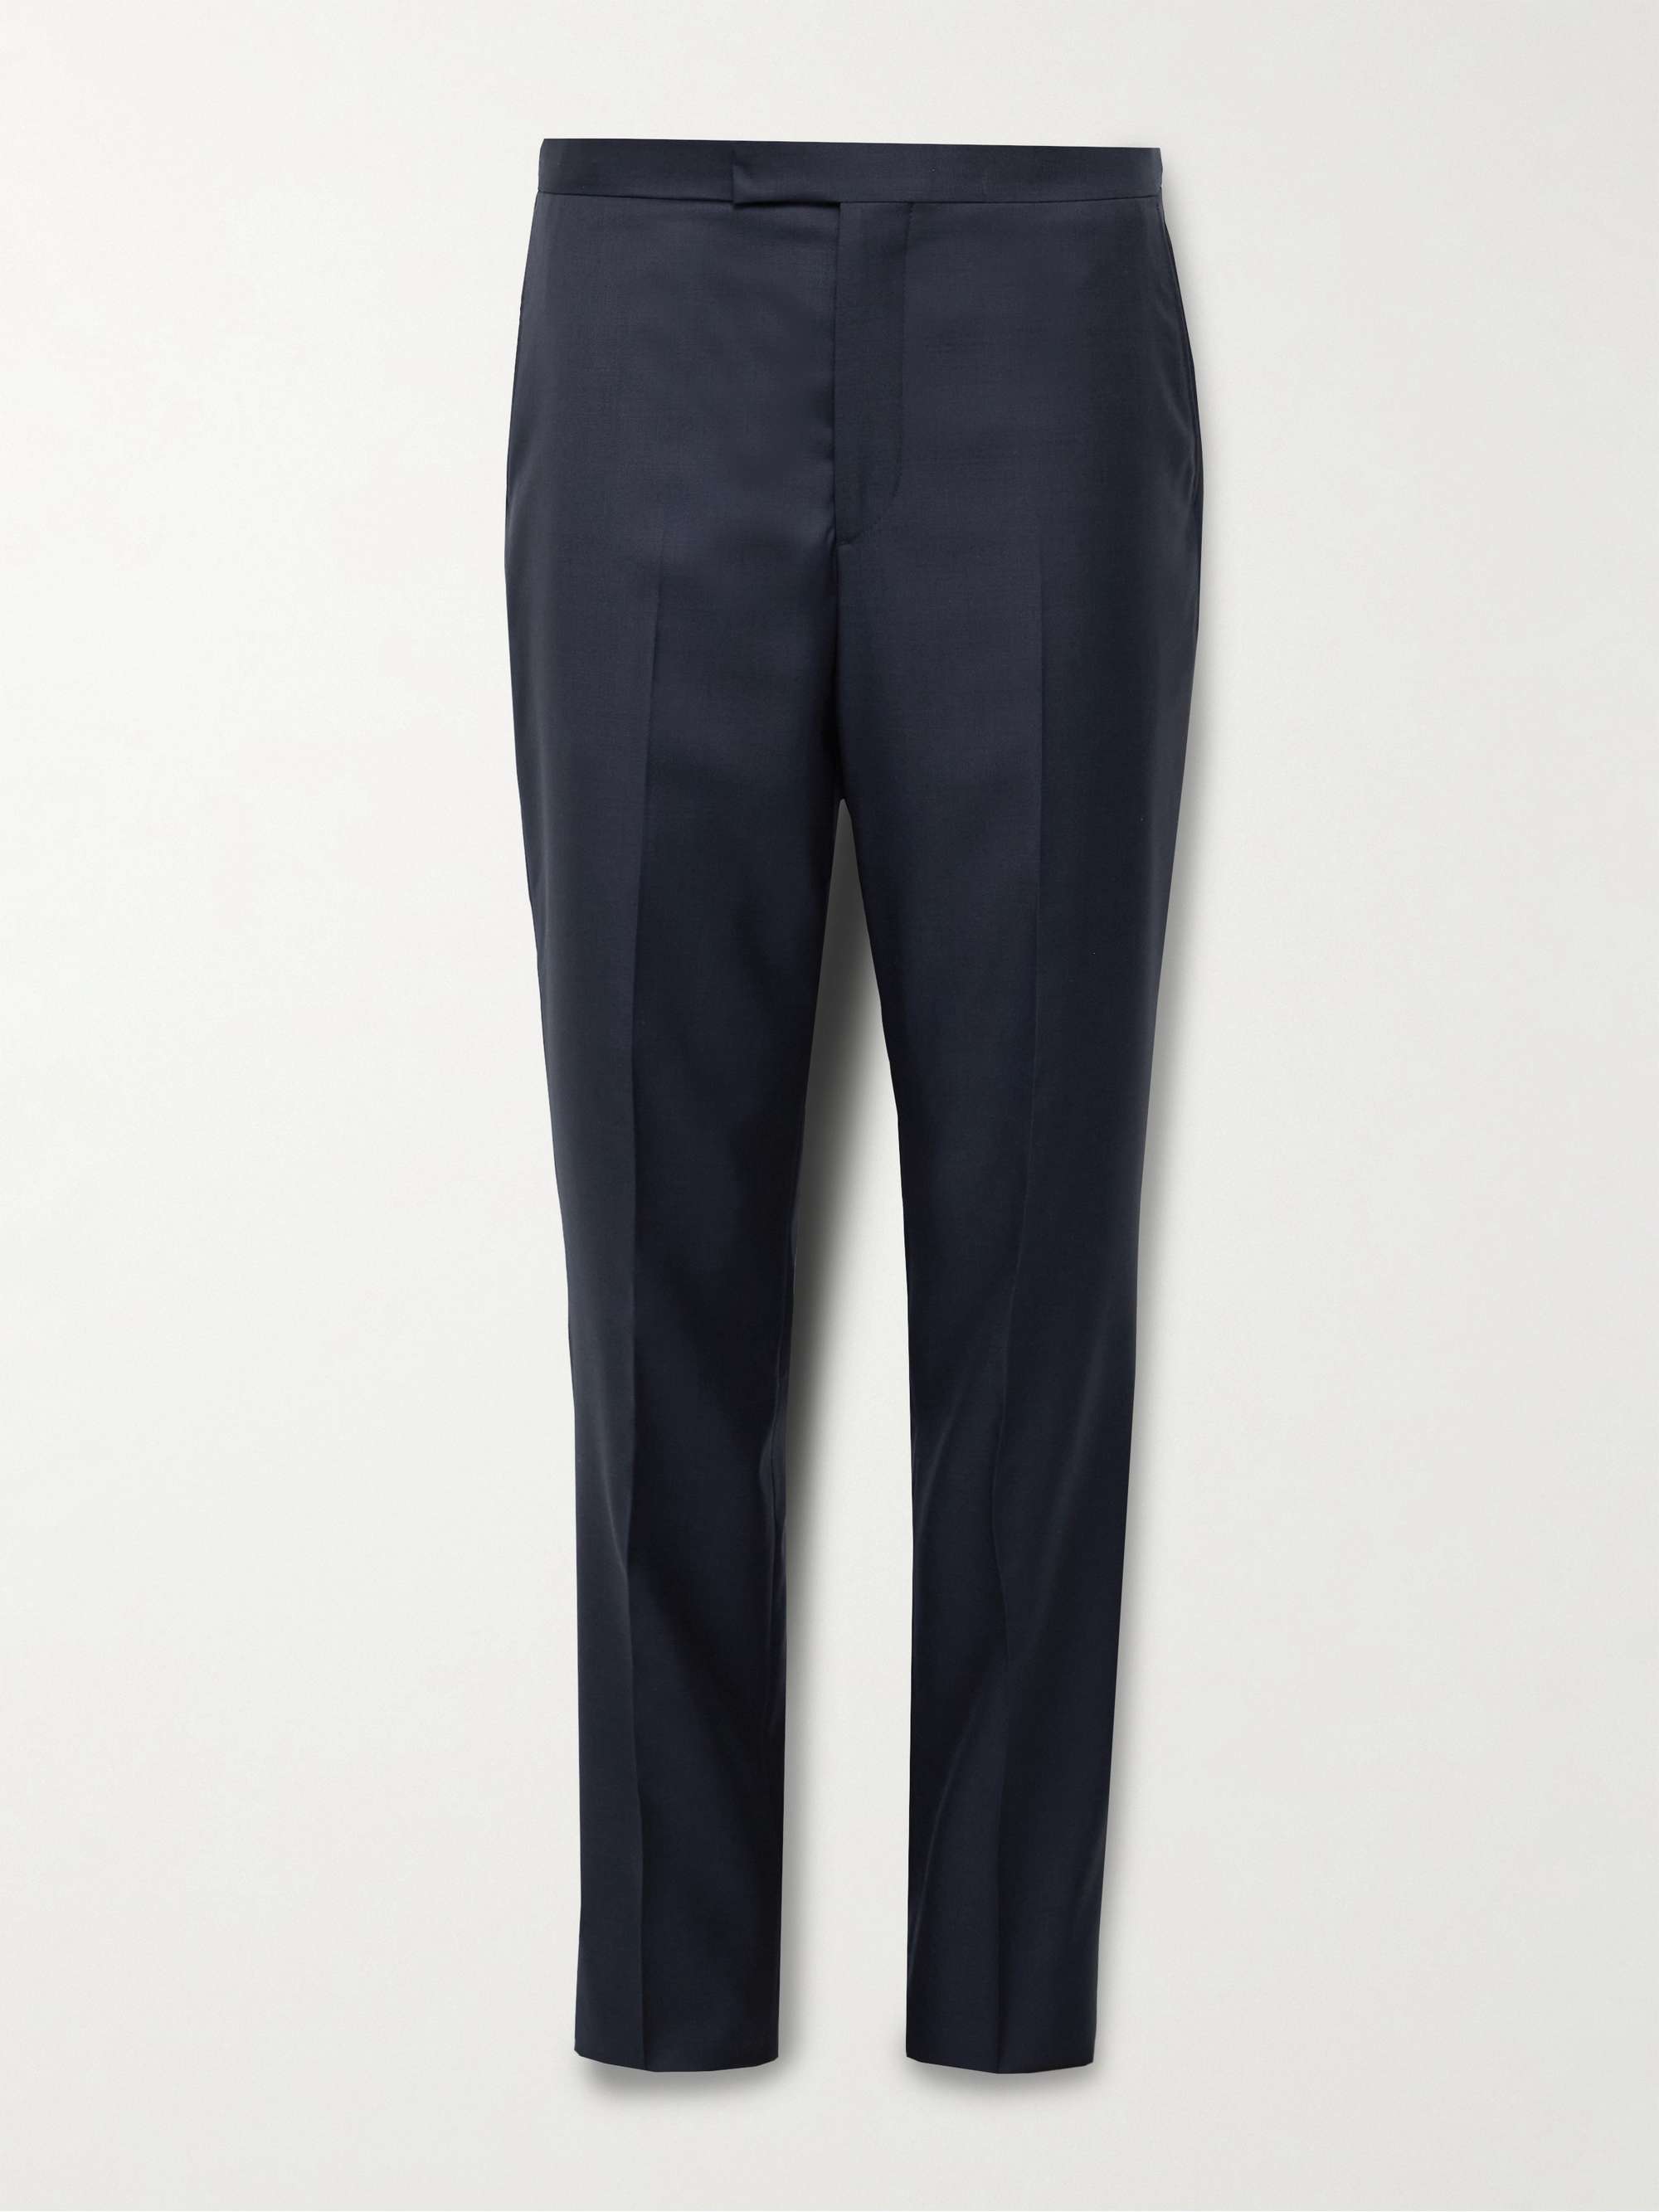 FAVOURBROOK Slim-Fit Wool Trousers